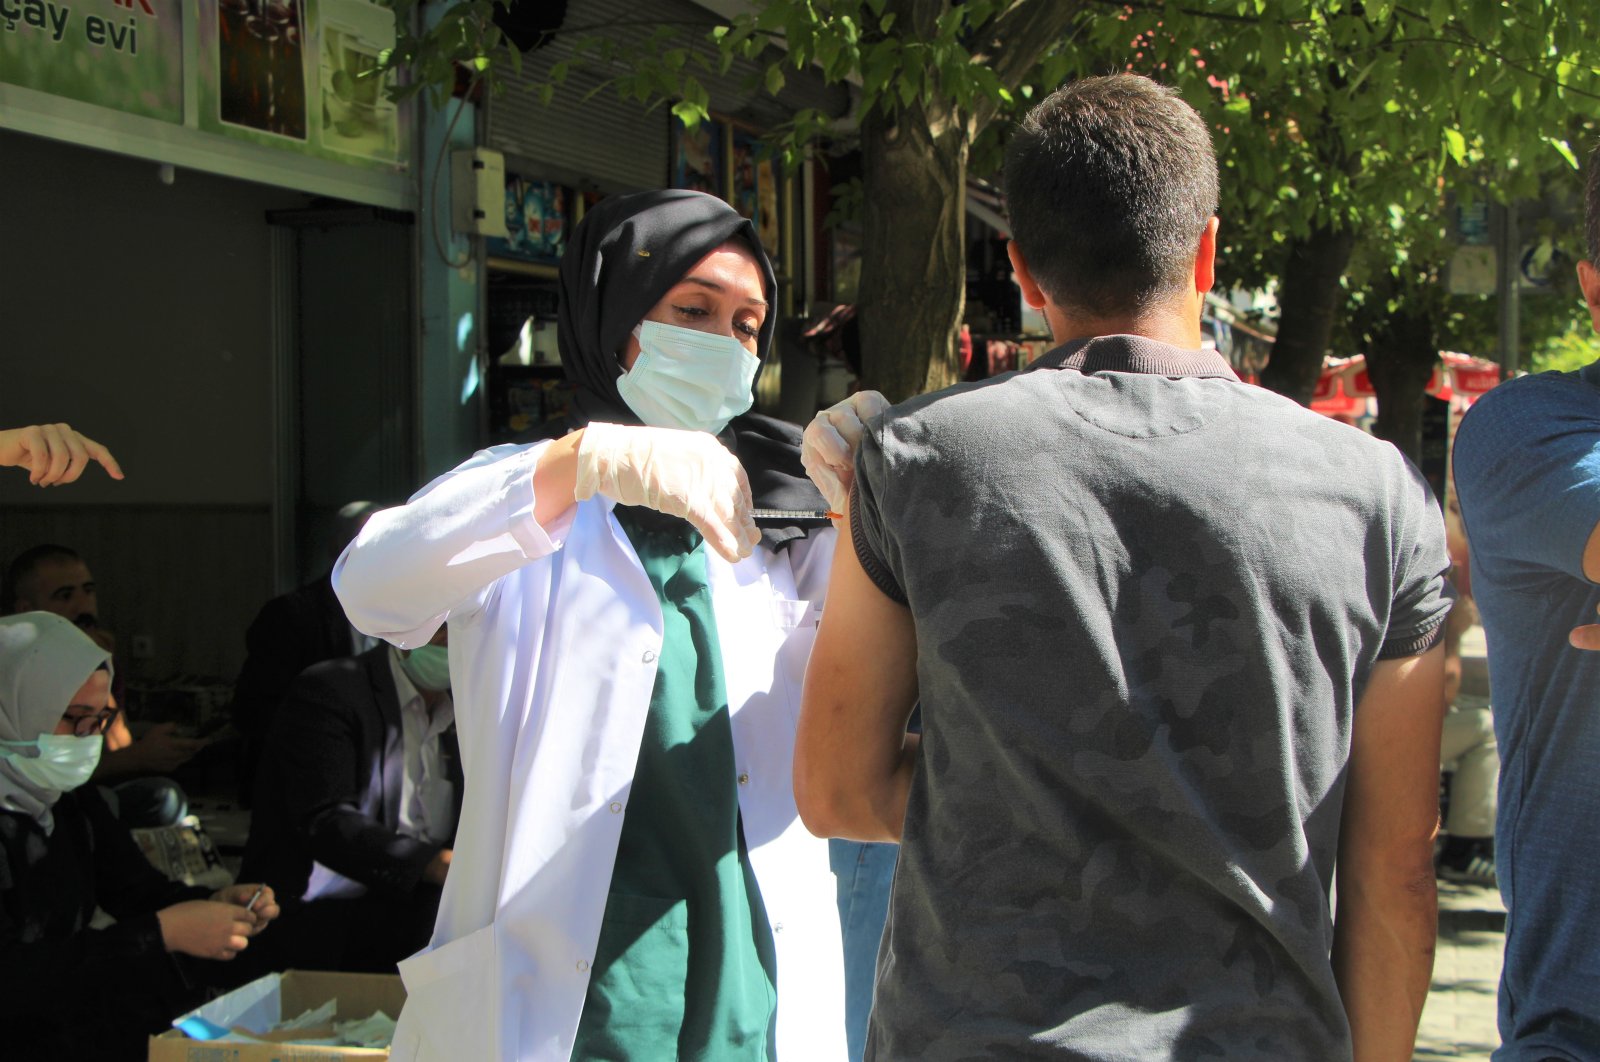 A man gets vaccinated at a vaccination point on a street in Bingöl, eastern Turkey, Sept. 8, 2021. (İHA PHOTO)